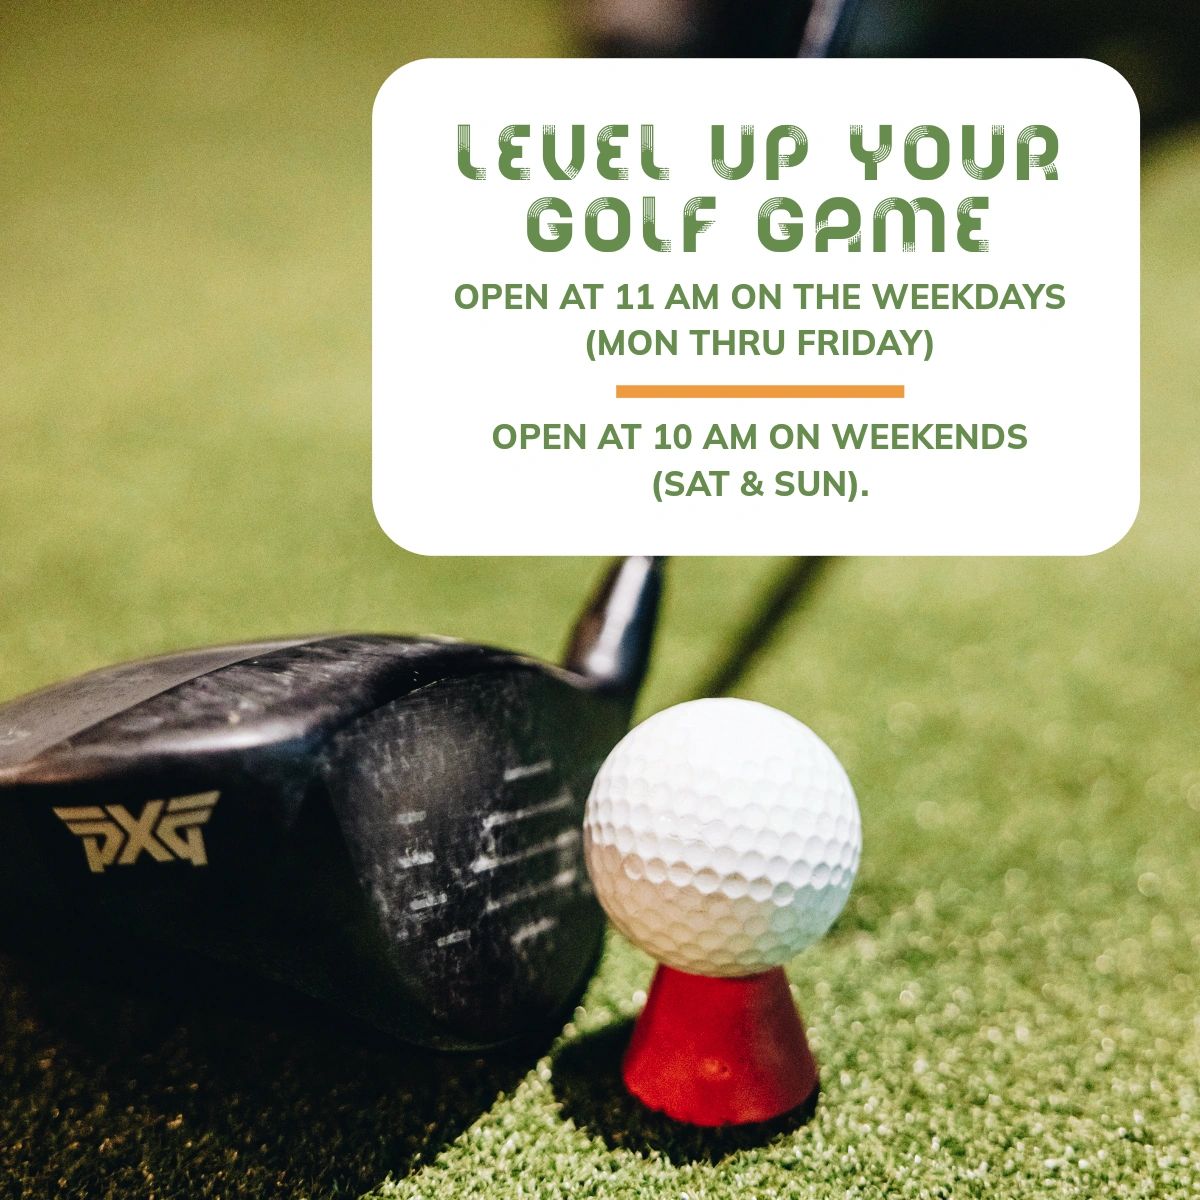 Link up with your golf buddies for a great time! We open at 11 AM on weekdays and 10 AM on weekends. Don't forget to try our new breakfast options while practicing on our Trackman simulators. ⛳ #LinksClub #GolfSimulator